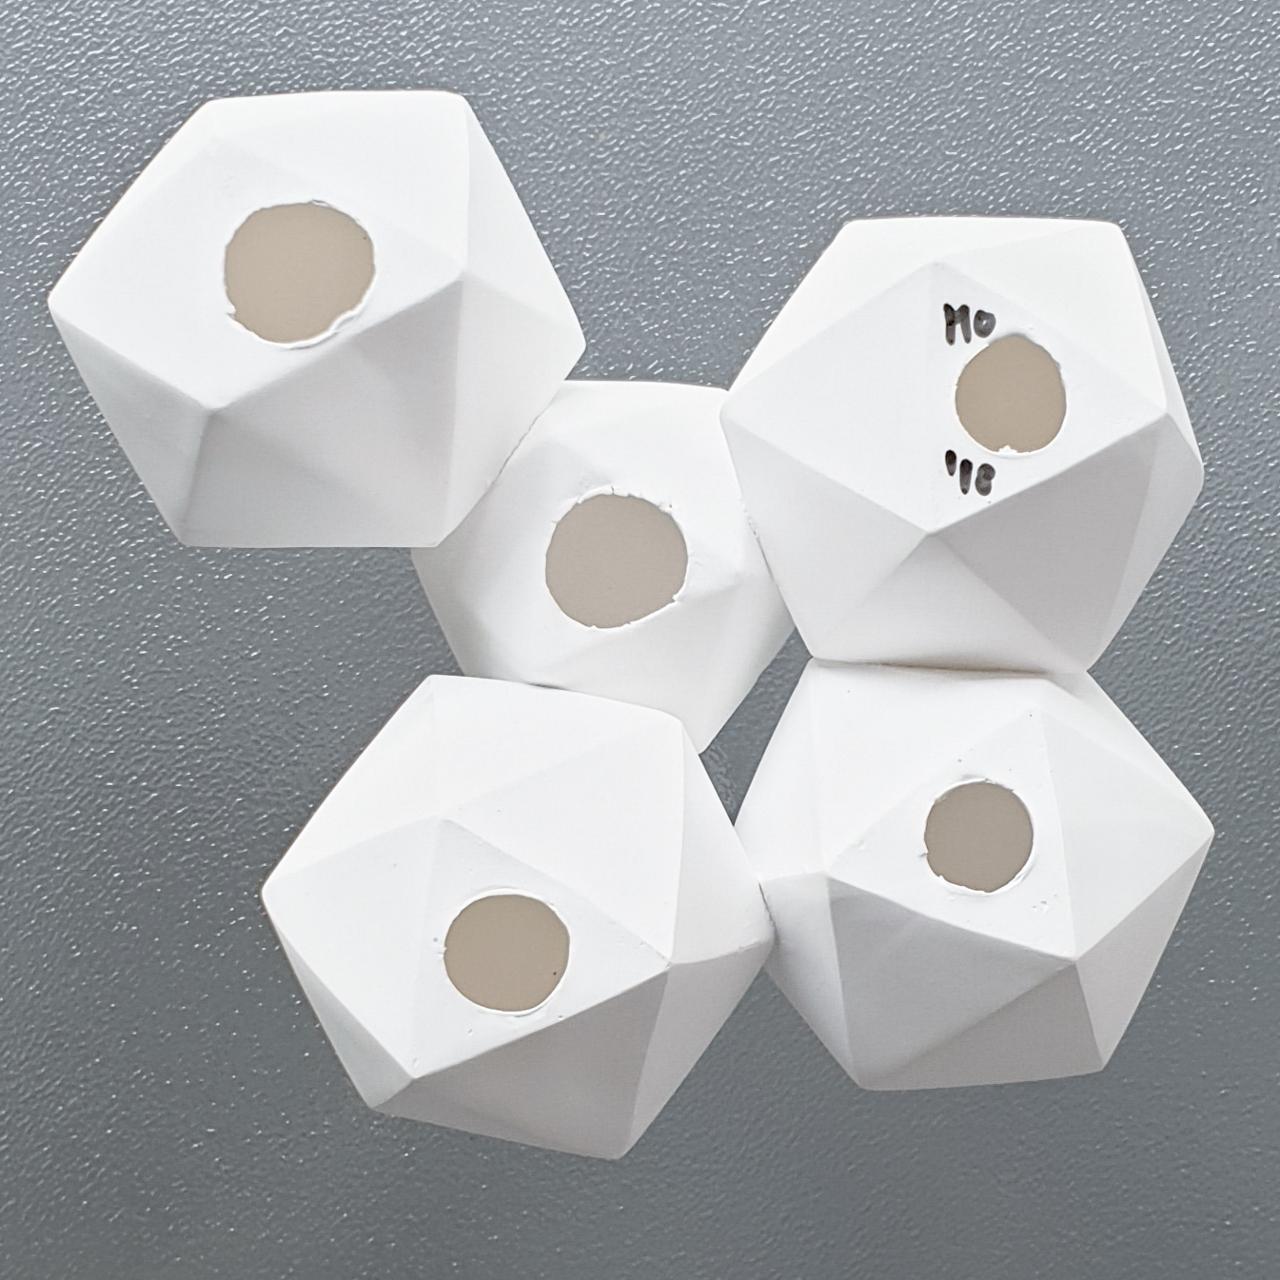 Icosahedron 5 - contemporary modern abstract geometric ceramic wall sculpture - Gray Abstract Sculpture by Mo Cornelisse